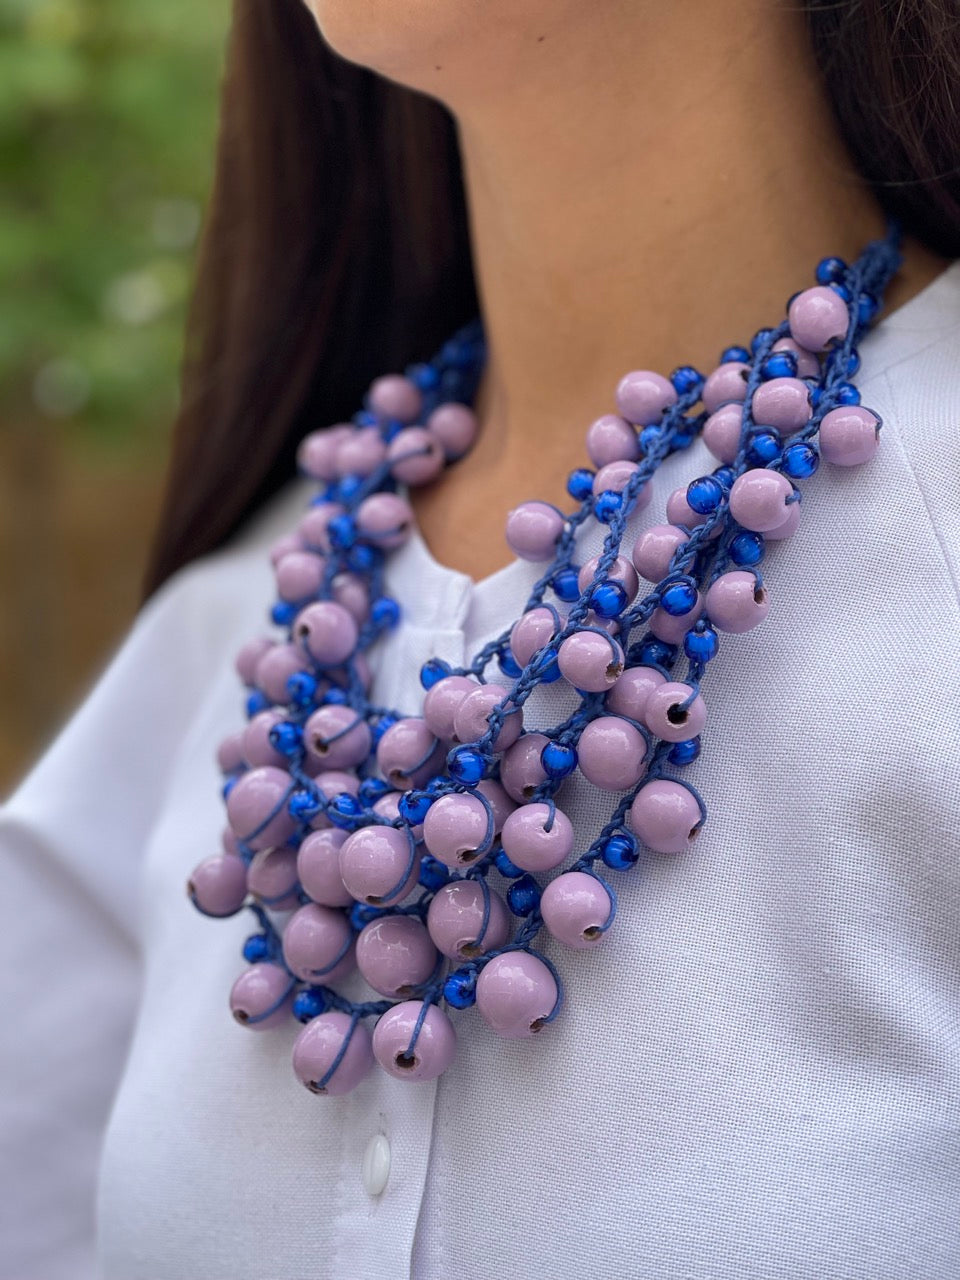 The Handcrafted Lavender Wooden Necklace